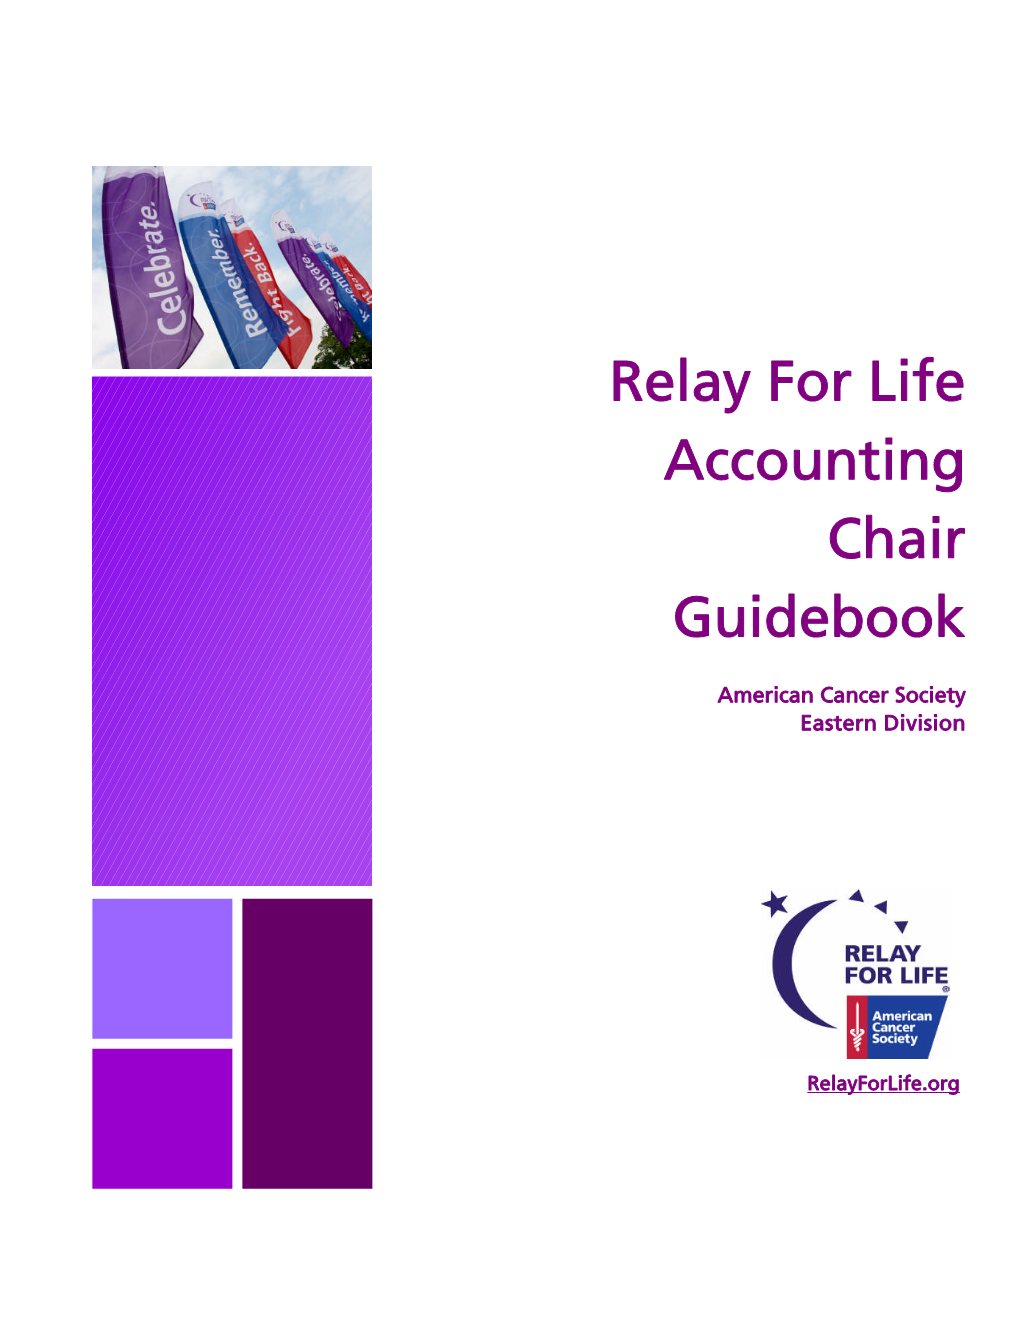 Relay for Life Accounting Chair Guidebook